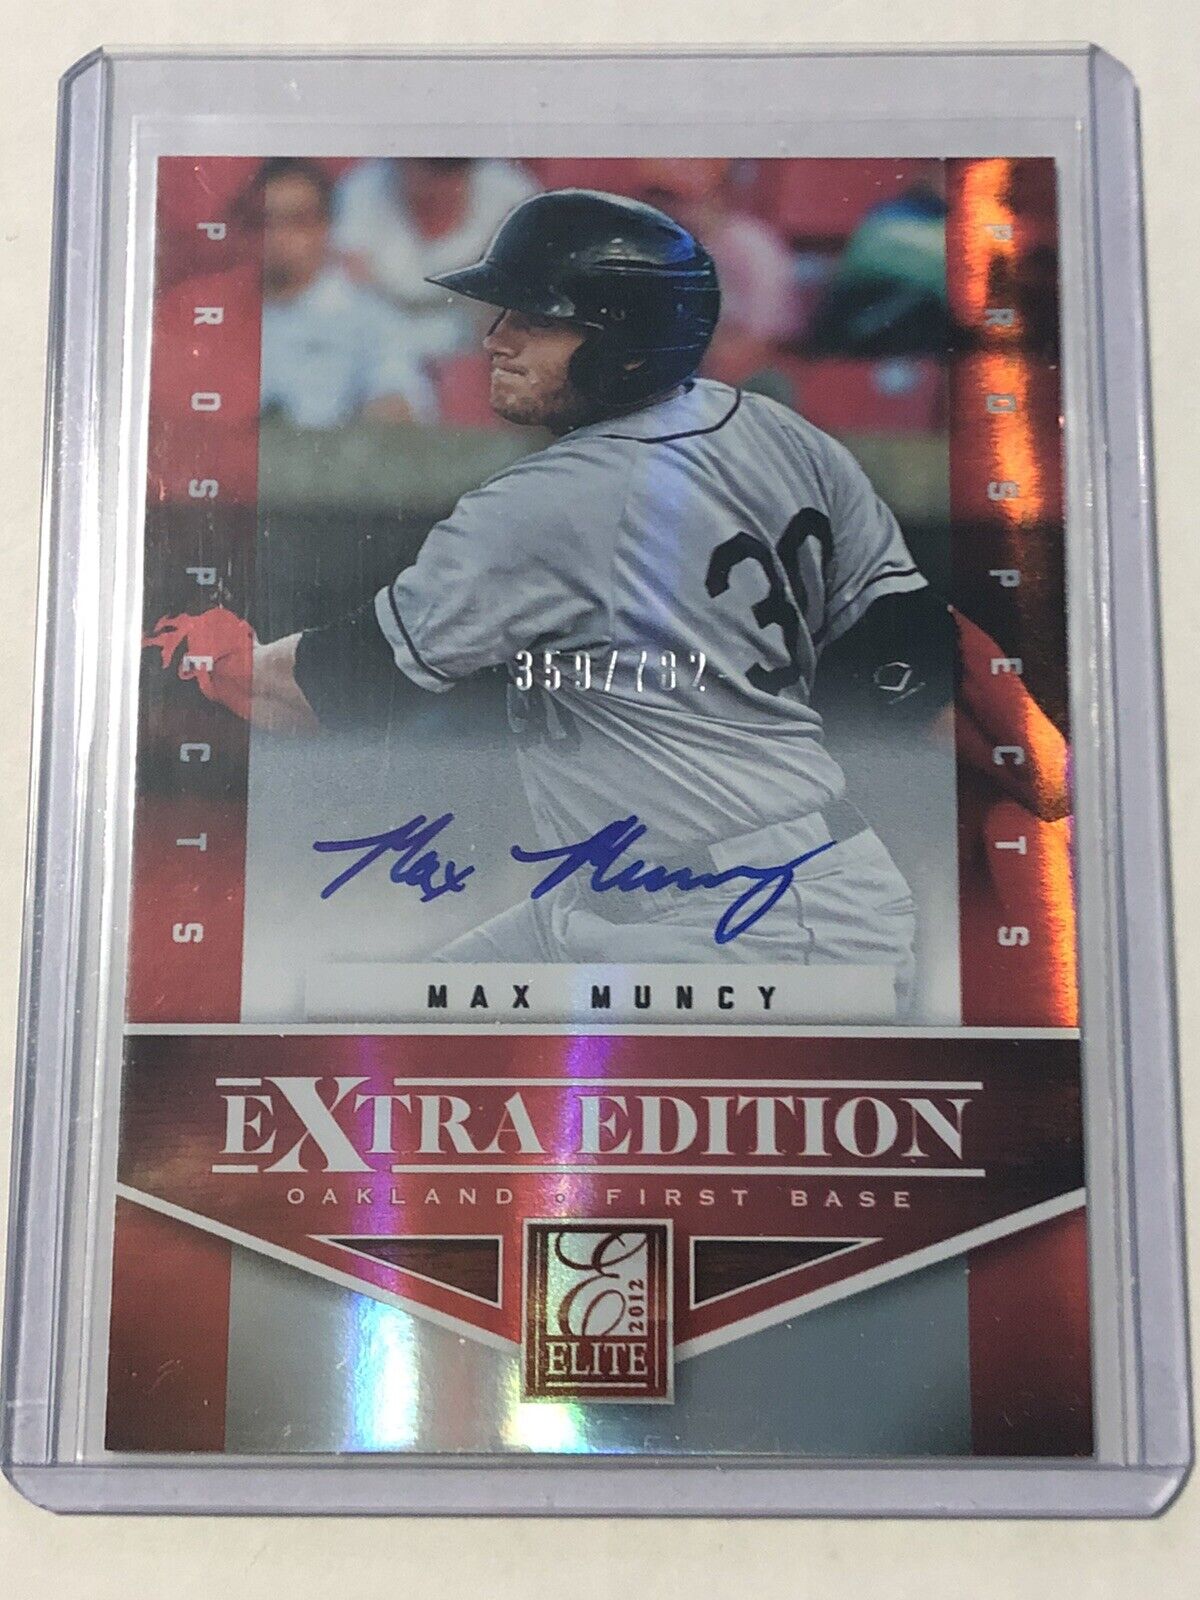 2012 Elite Extra Edition Auto Max Muncy RC. Serial #359/782. Dodgers WS Champs?